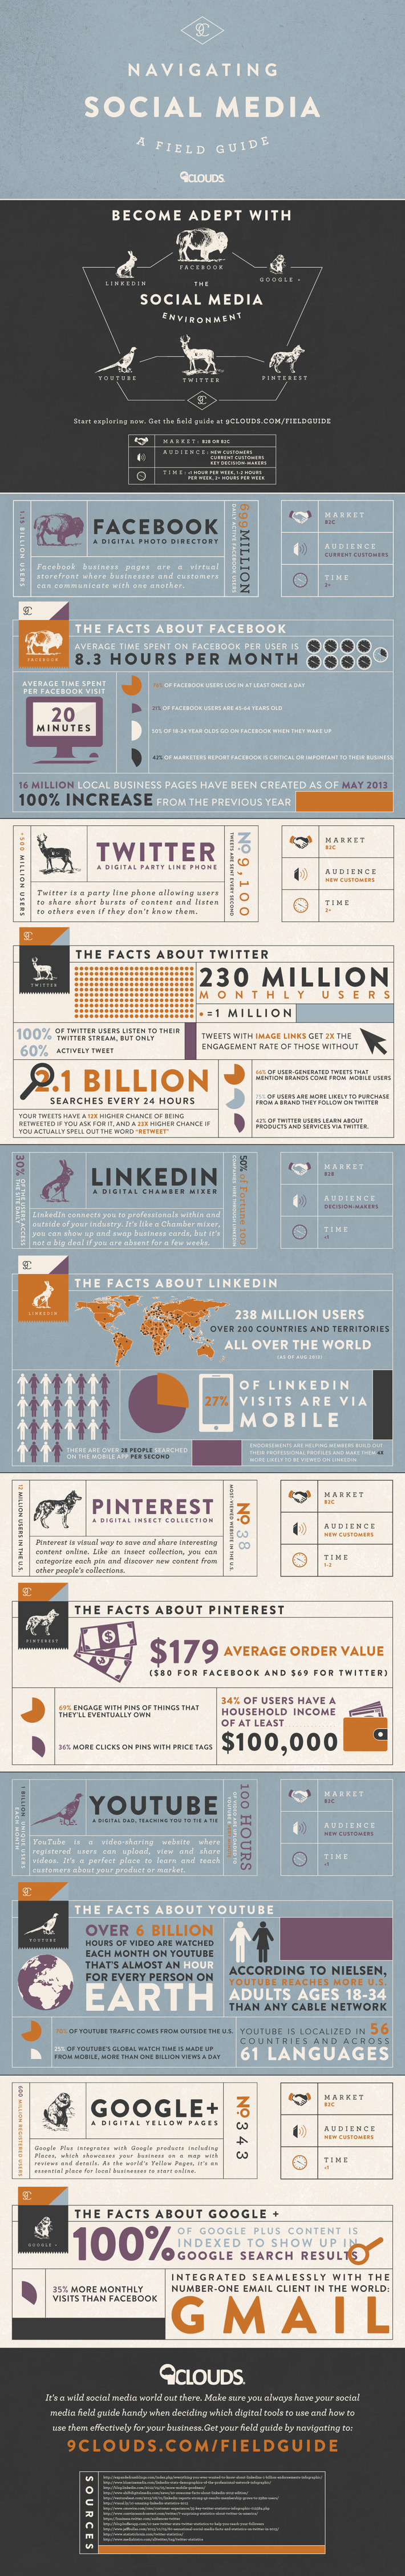 An Infographic Field Guide to Navigating Social Media | Digitalisation & Distributeurs | Scoop.it